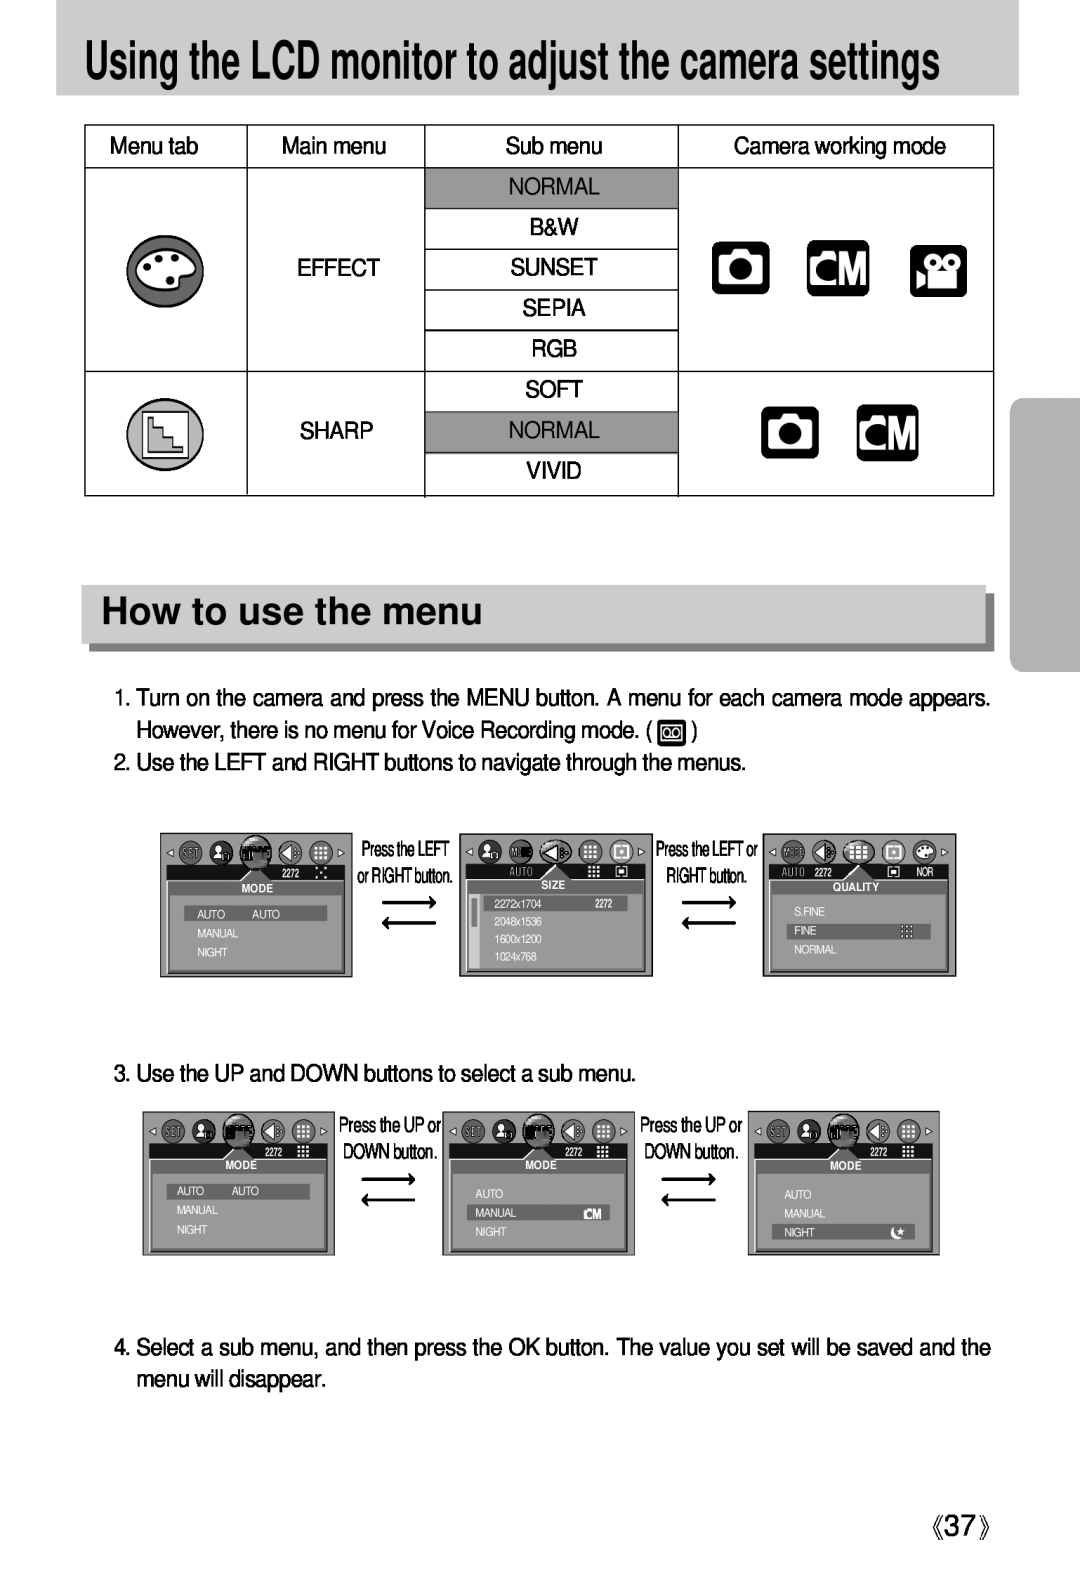 Samsung Digimax U-CA user manual How to use the menu, Using the LCD monitor to adjust the camera settings, Press the LEFT 